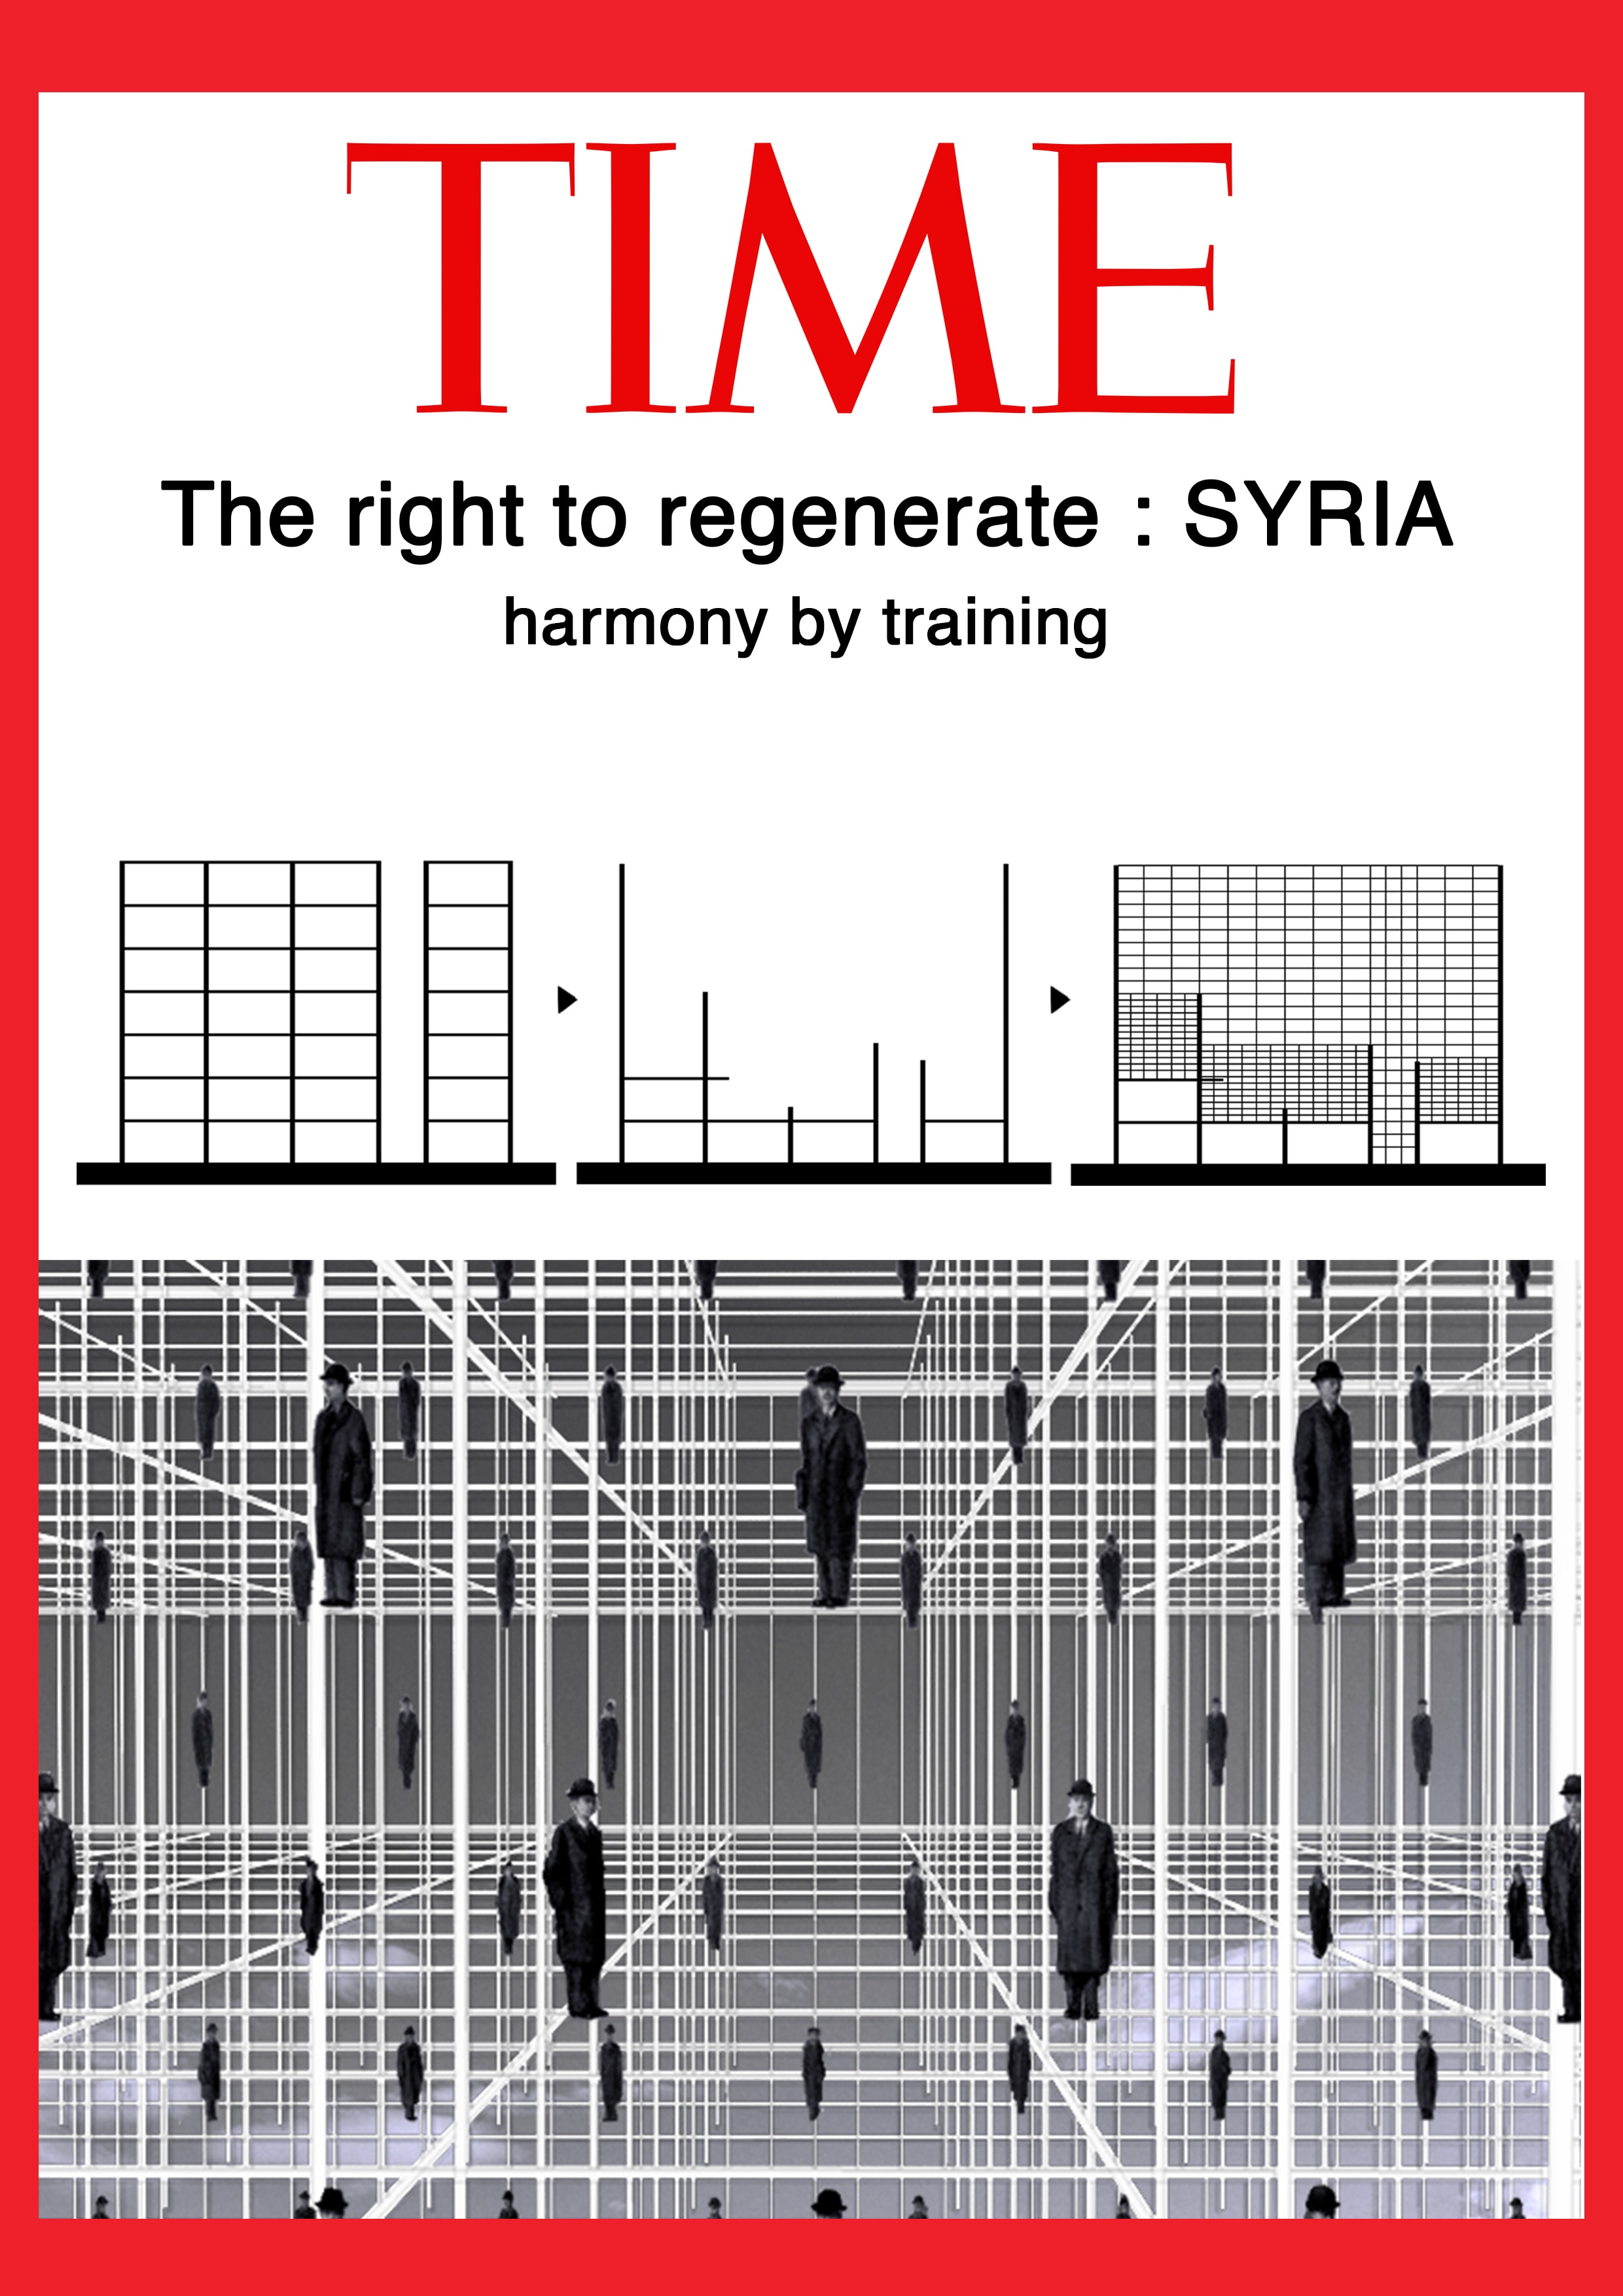 The right to regenerate, Syria